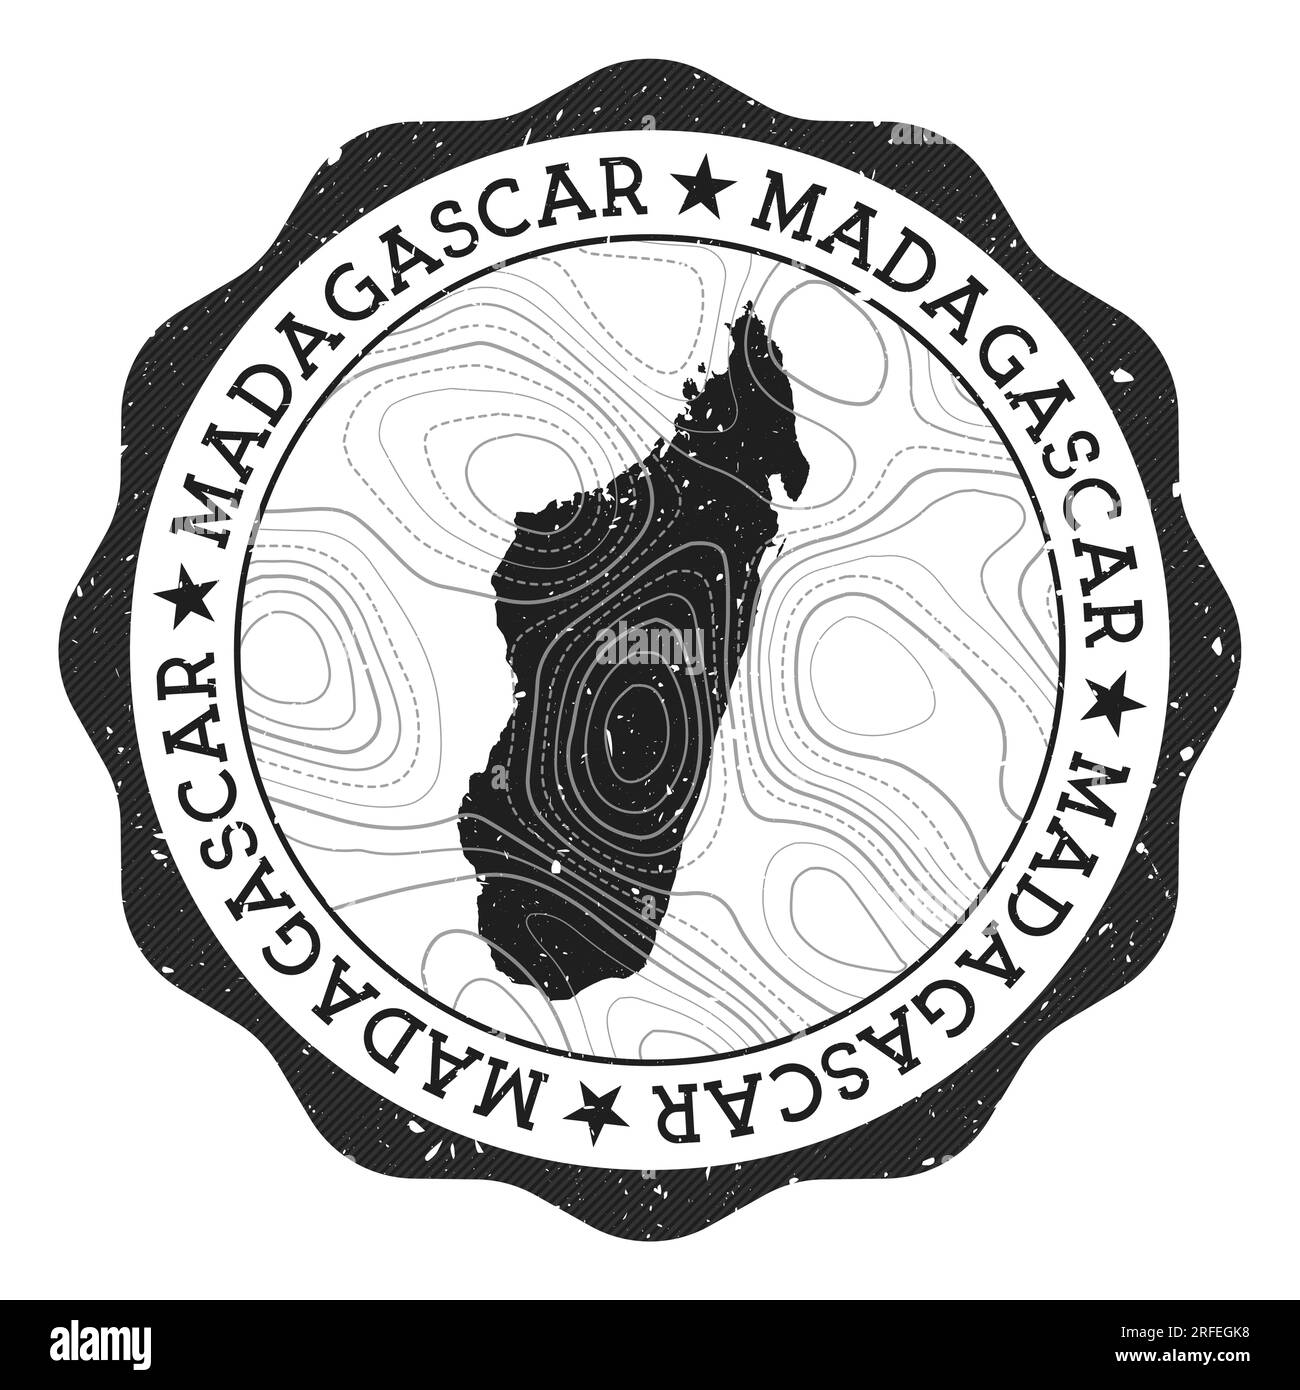 Madagascar outdoor stamp. Round sticker with map of country with topographic isolines. Vector illustration. Can be used as insignia, logotype, label, Stock Vector